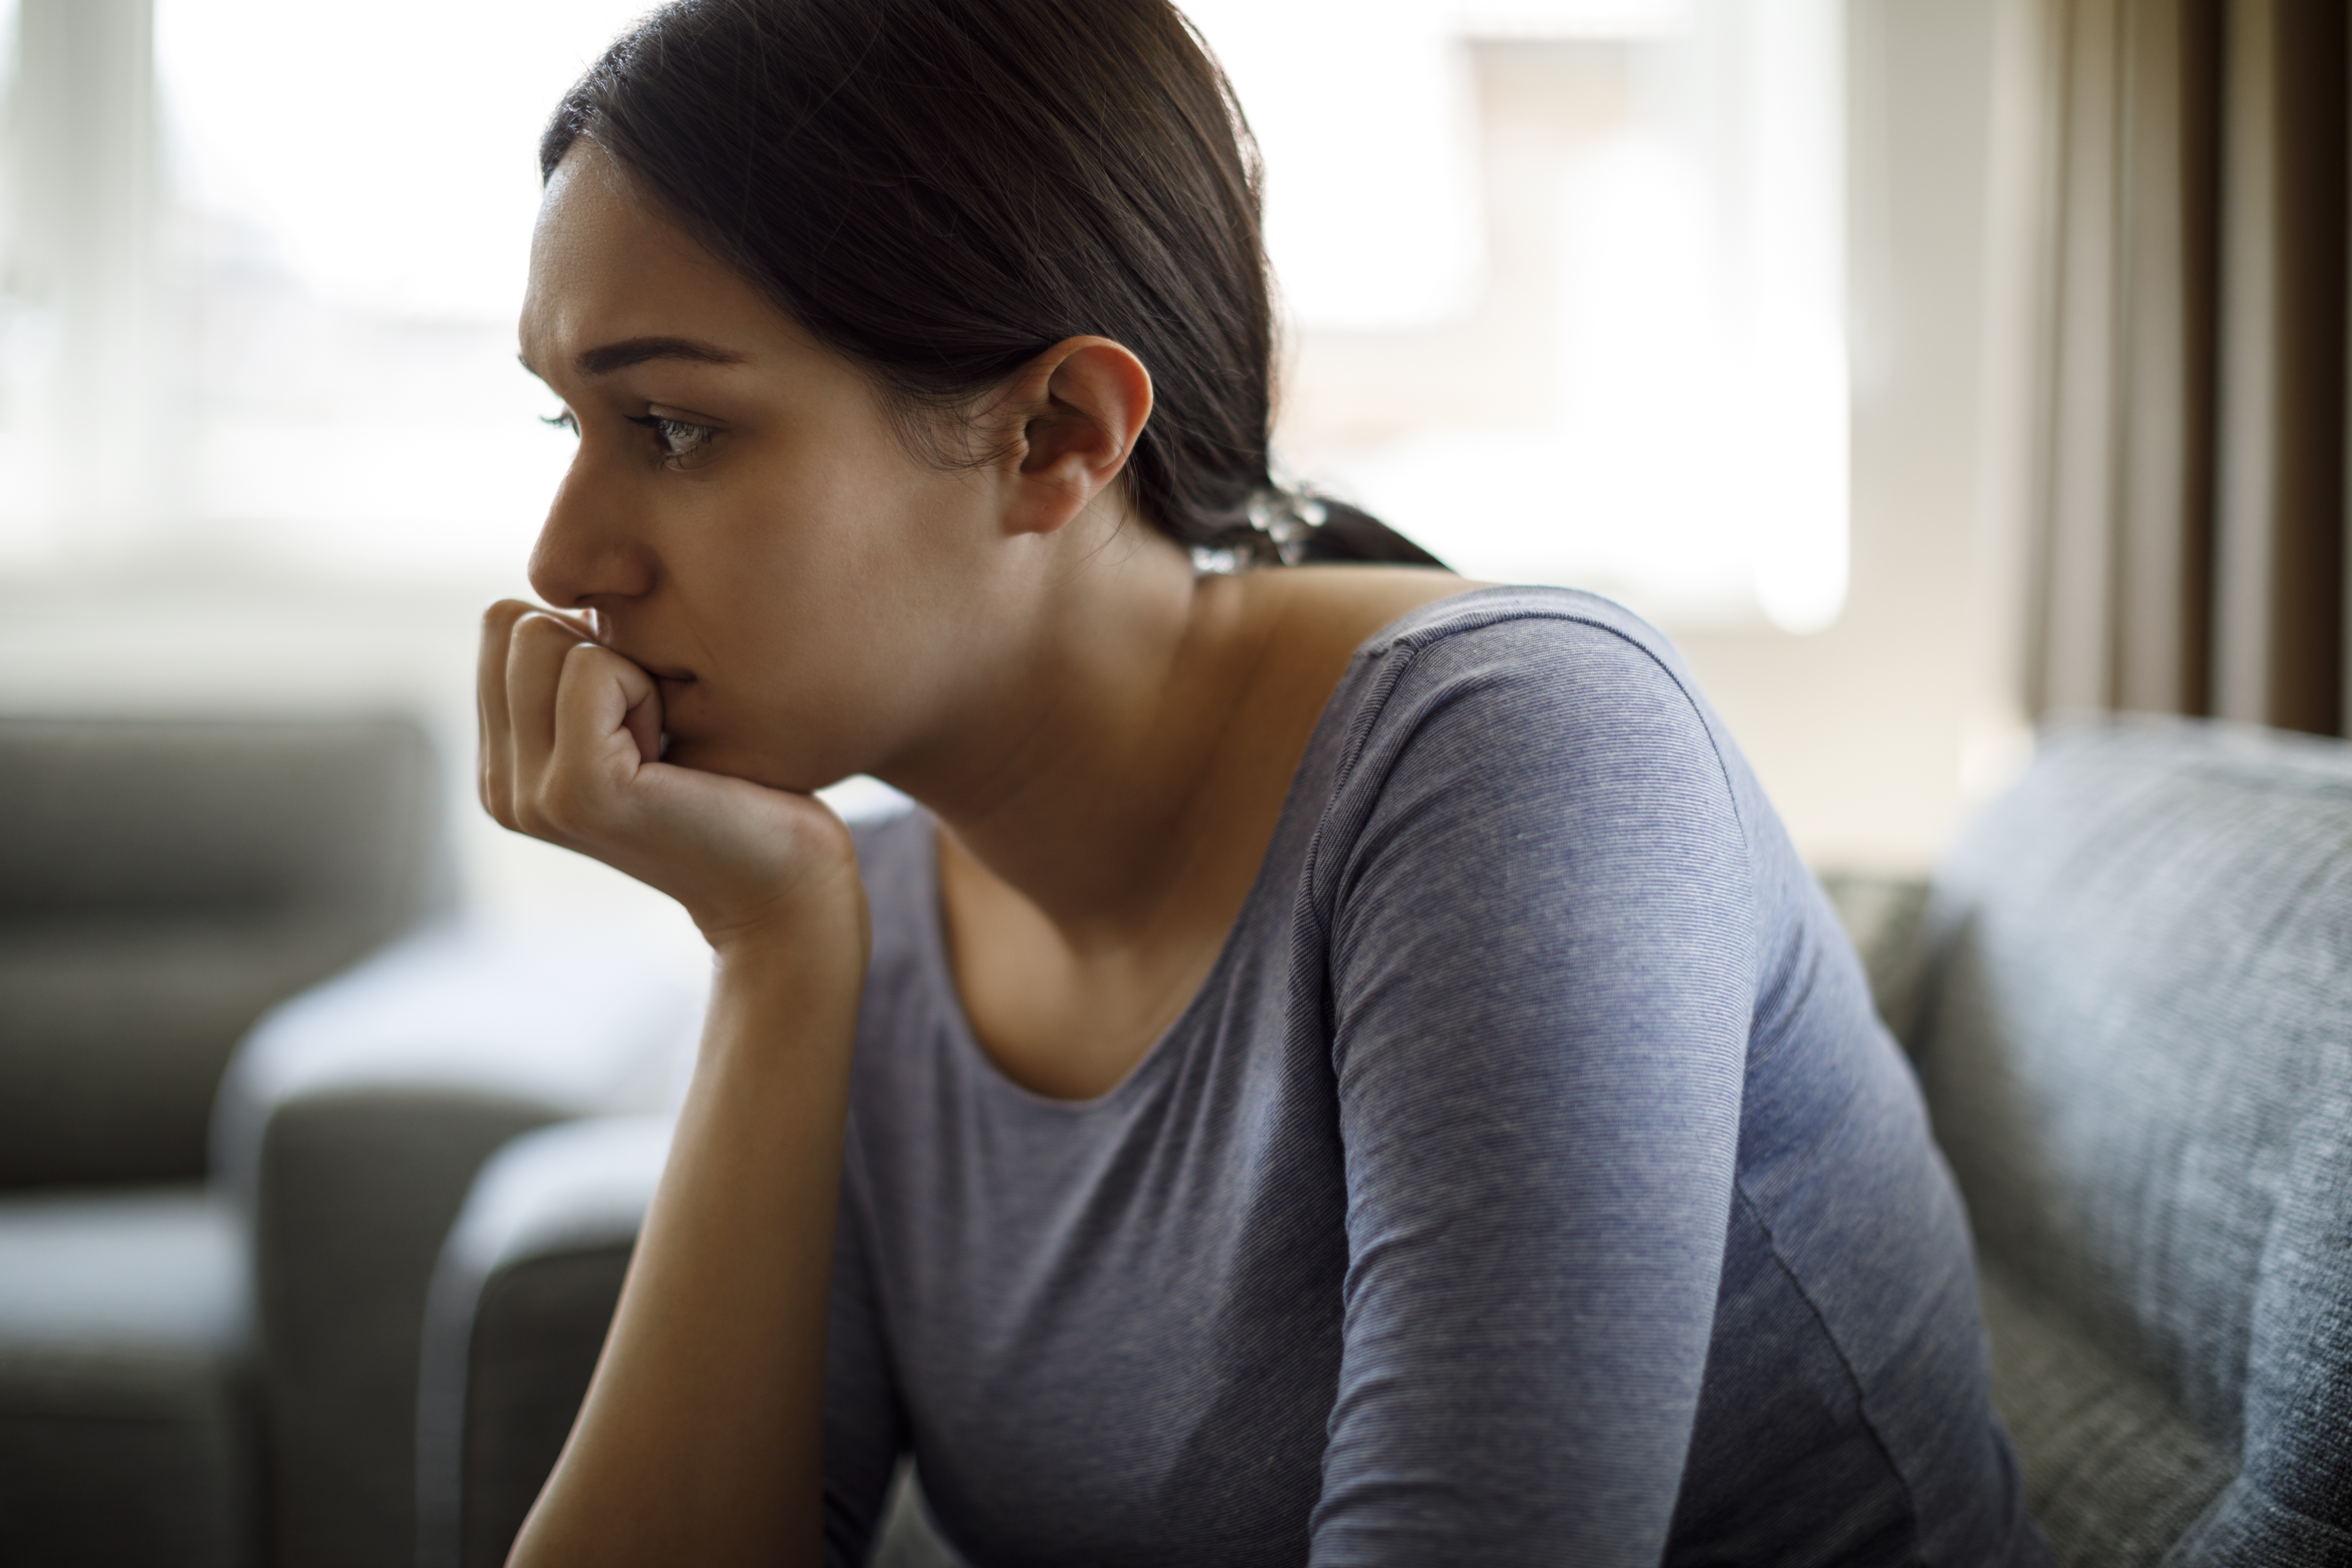 Upset woman sitting on sofa alone at home | Source: Getty Images